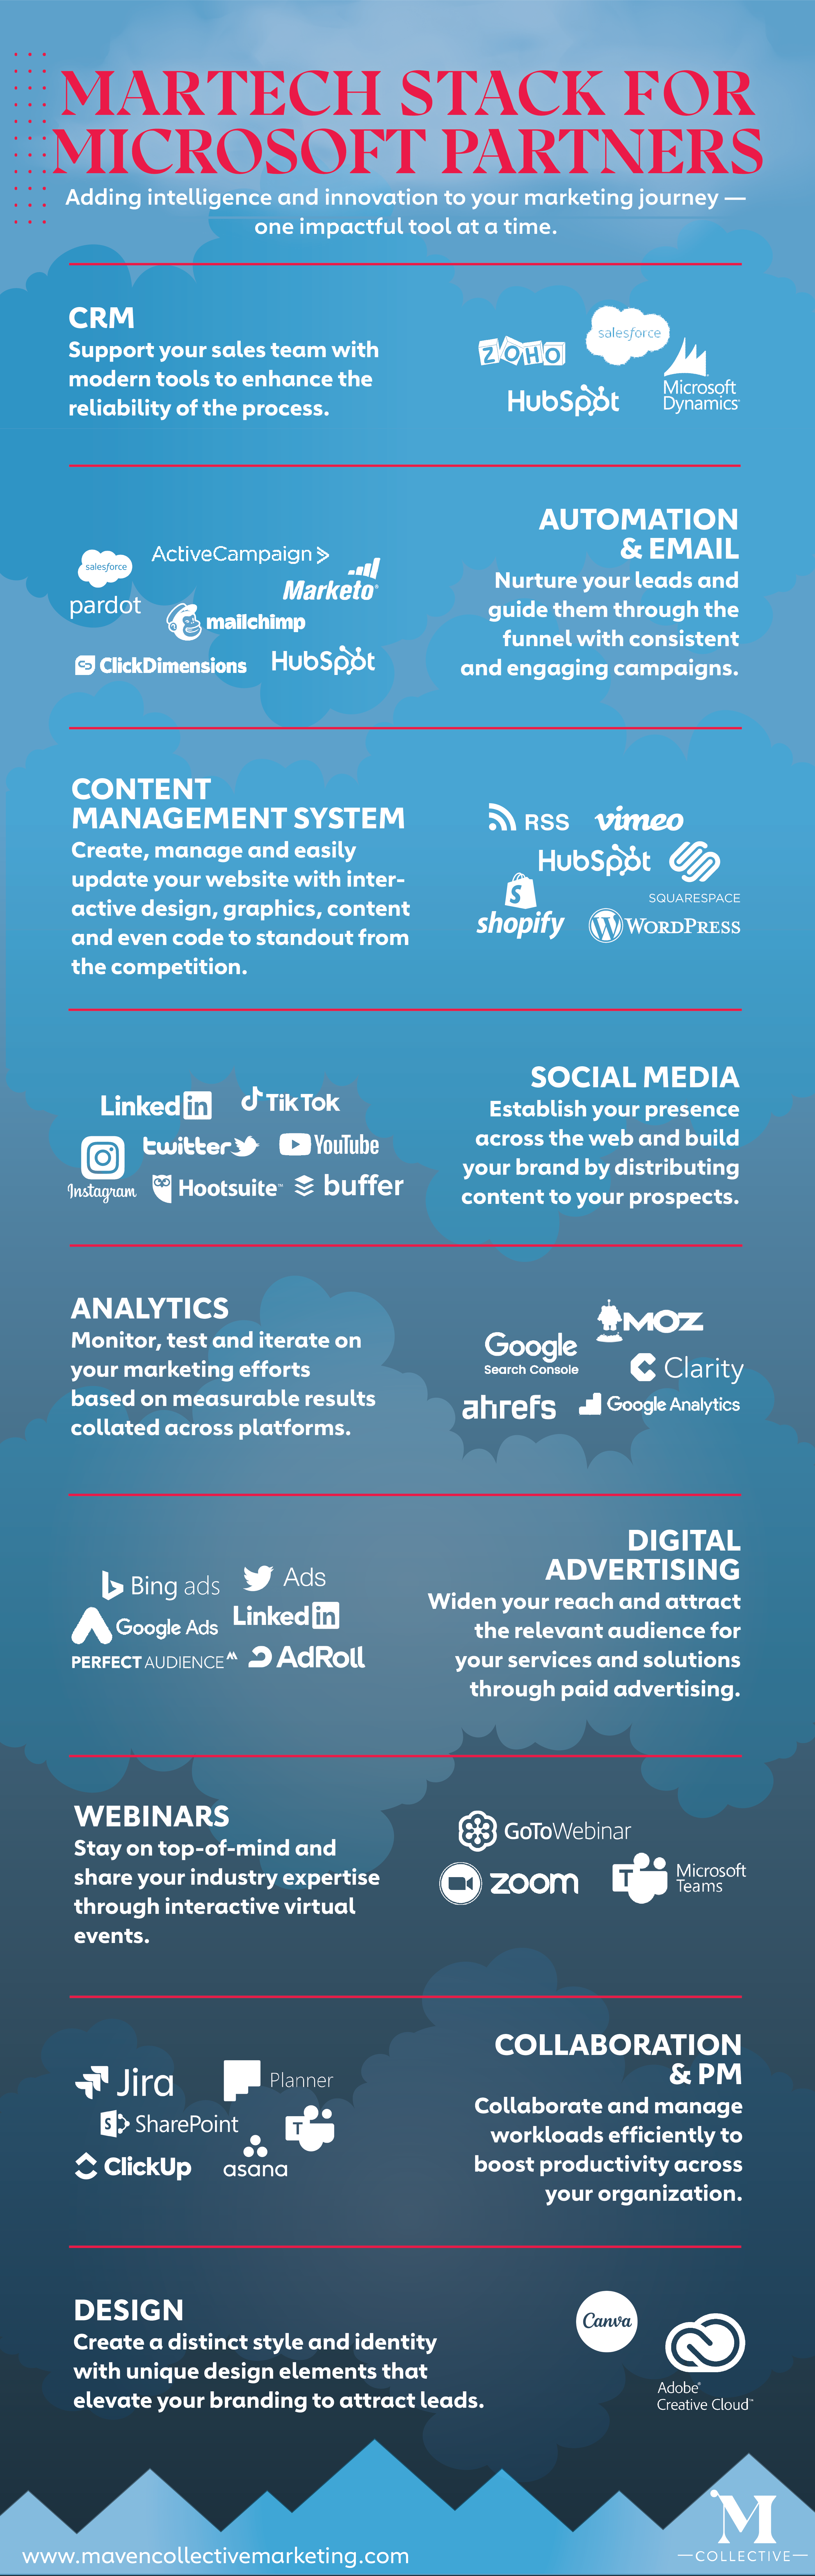 martech stack infographic for marketing strategy